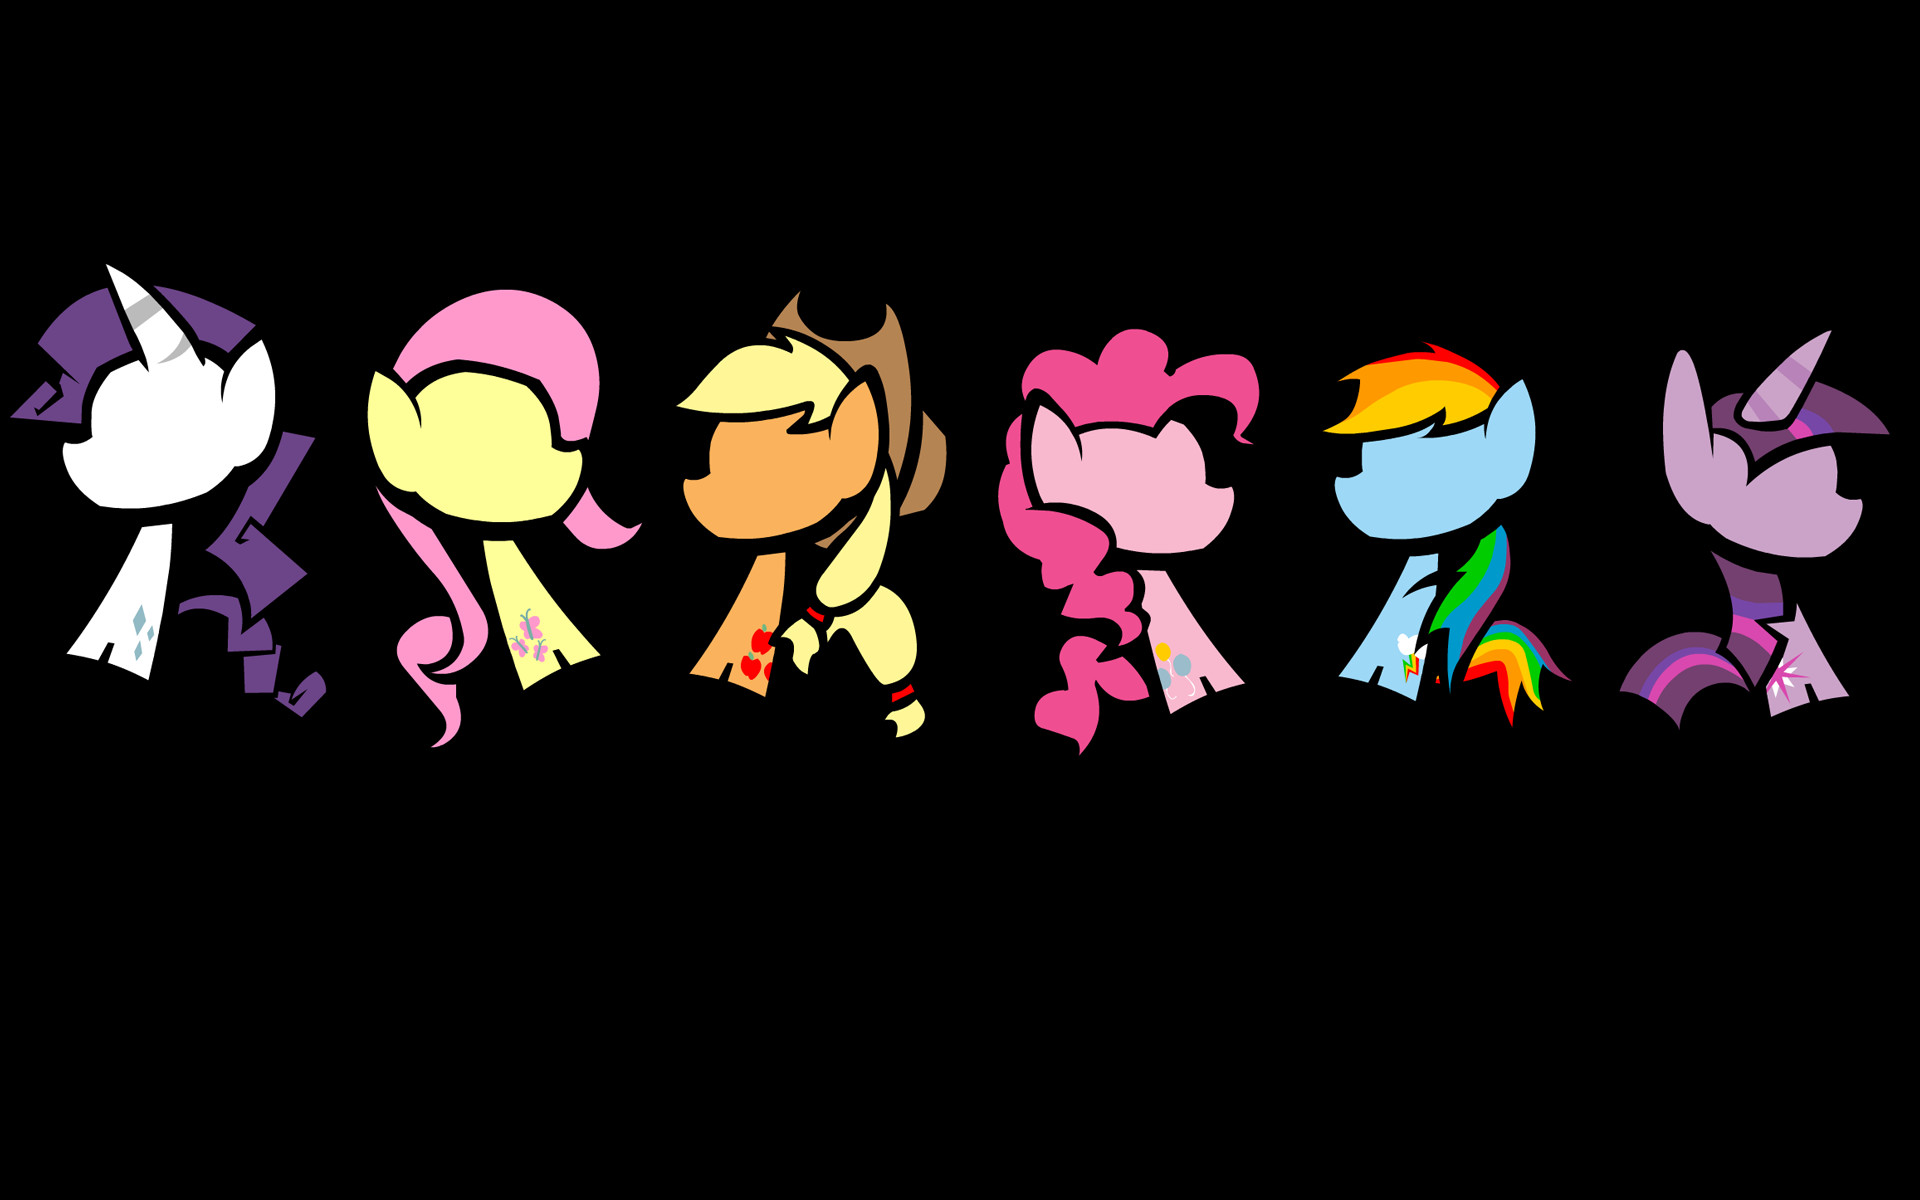 1920x1200 My-little-pony-wallpaper-15-Cute-Collection-black-